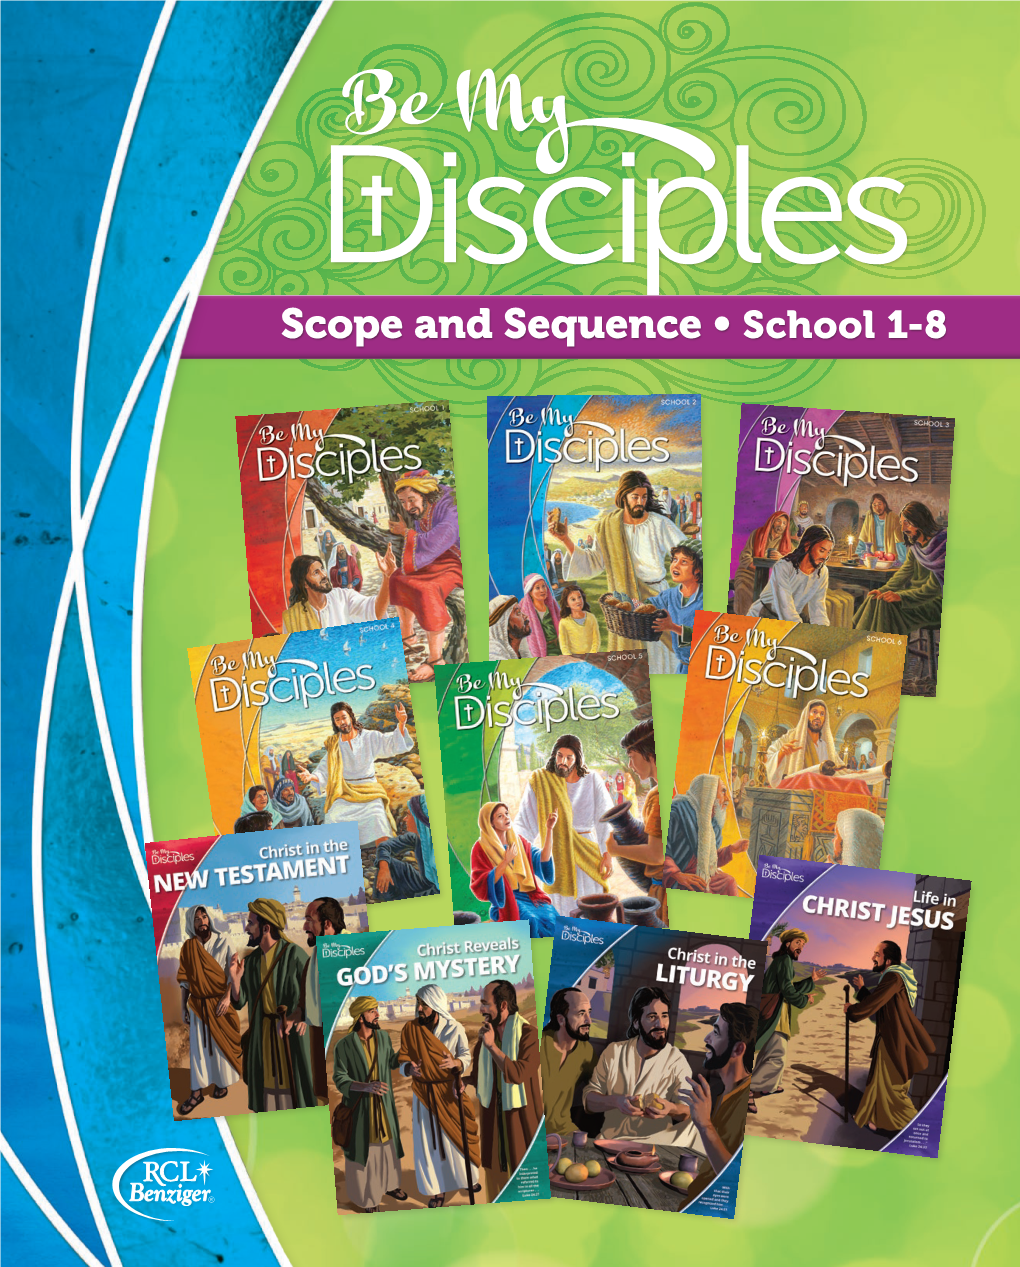 Scope and Sequence • School